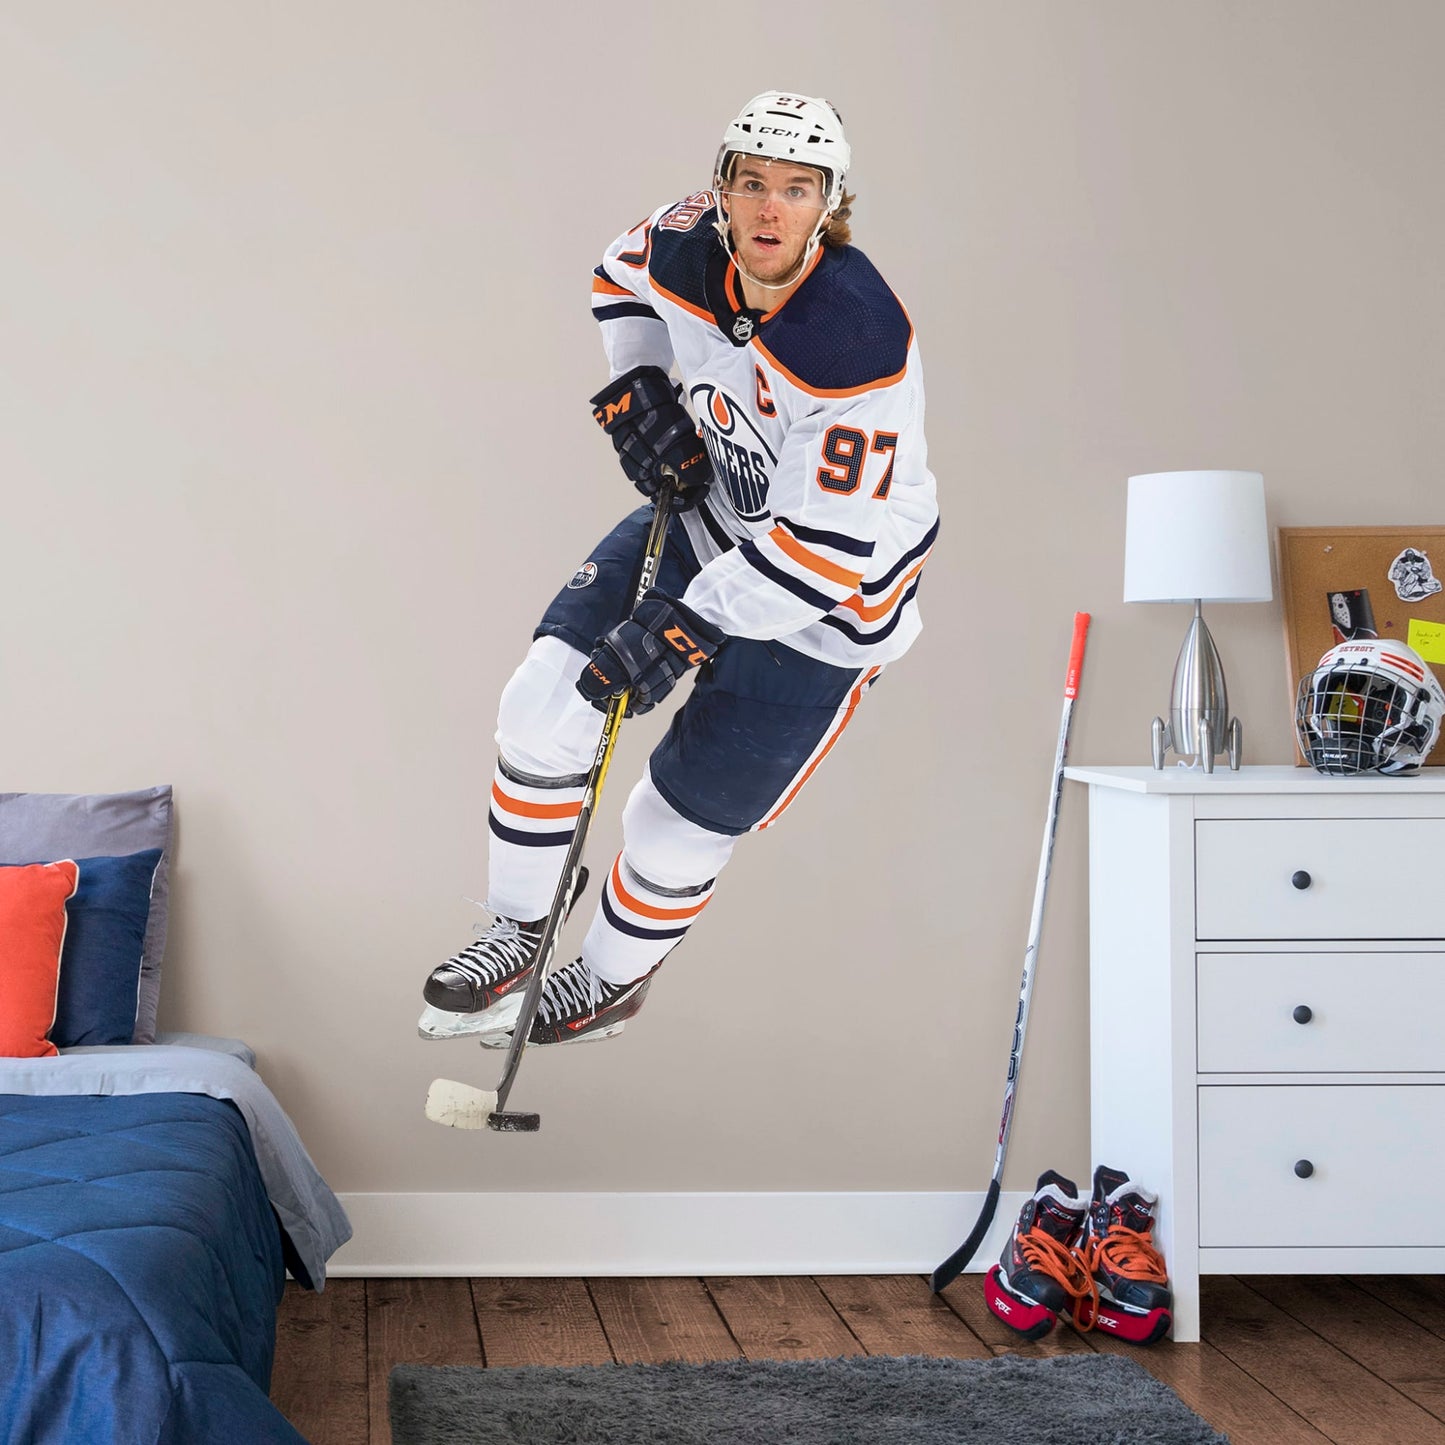 Life-Size Athlete + 2 Team Decals (39"W x 77"H) Widely considered to be among the best NHL players in the world, Edmonton Oilers centre and team captain Connor McDavid has cemented himself as a high-caliber player for the Oilers. Affectionately referred to as “Connor McSaviour” and the “Canadian Super Promise,” this officially licensed NHL wall decal depicts the full frame of the Edmonton Oiler’s 2015 first overall draft pick in his Away uniform.